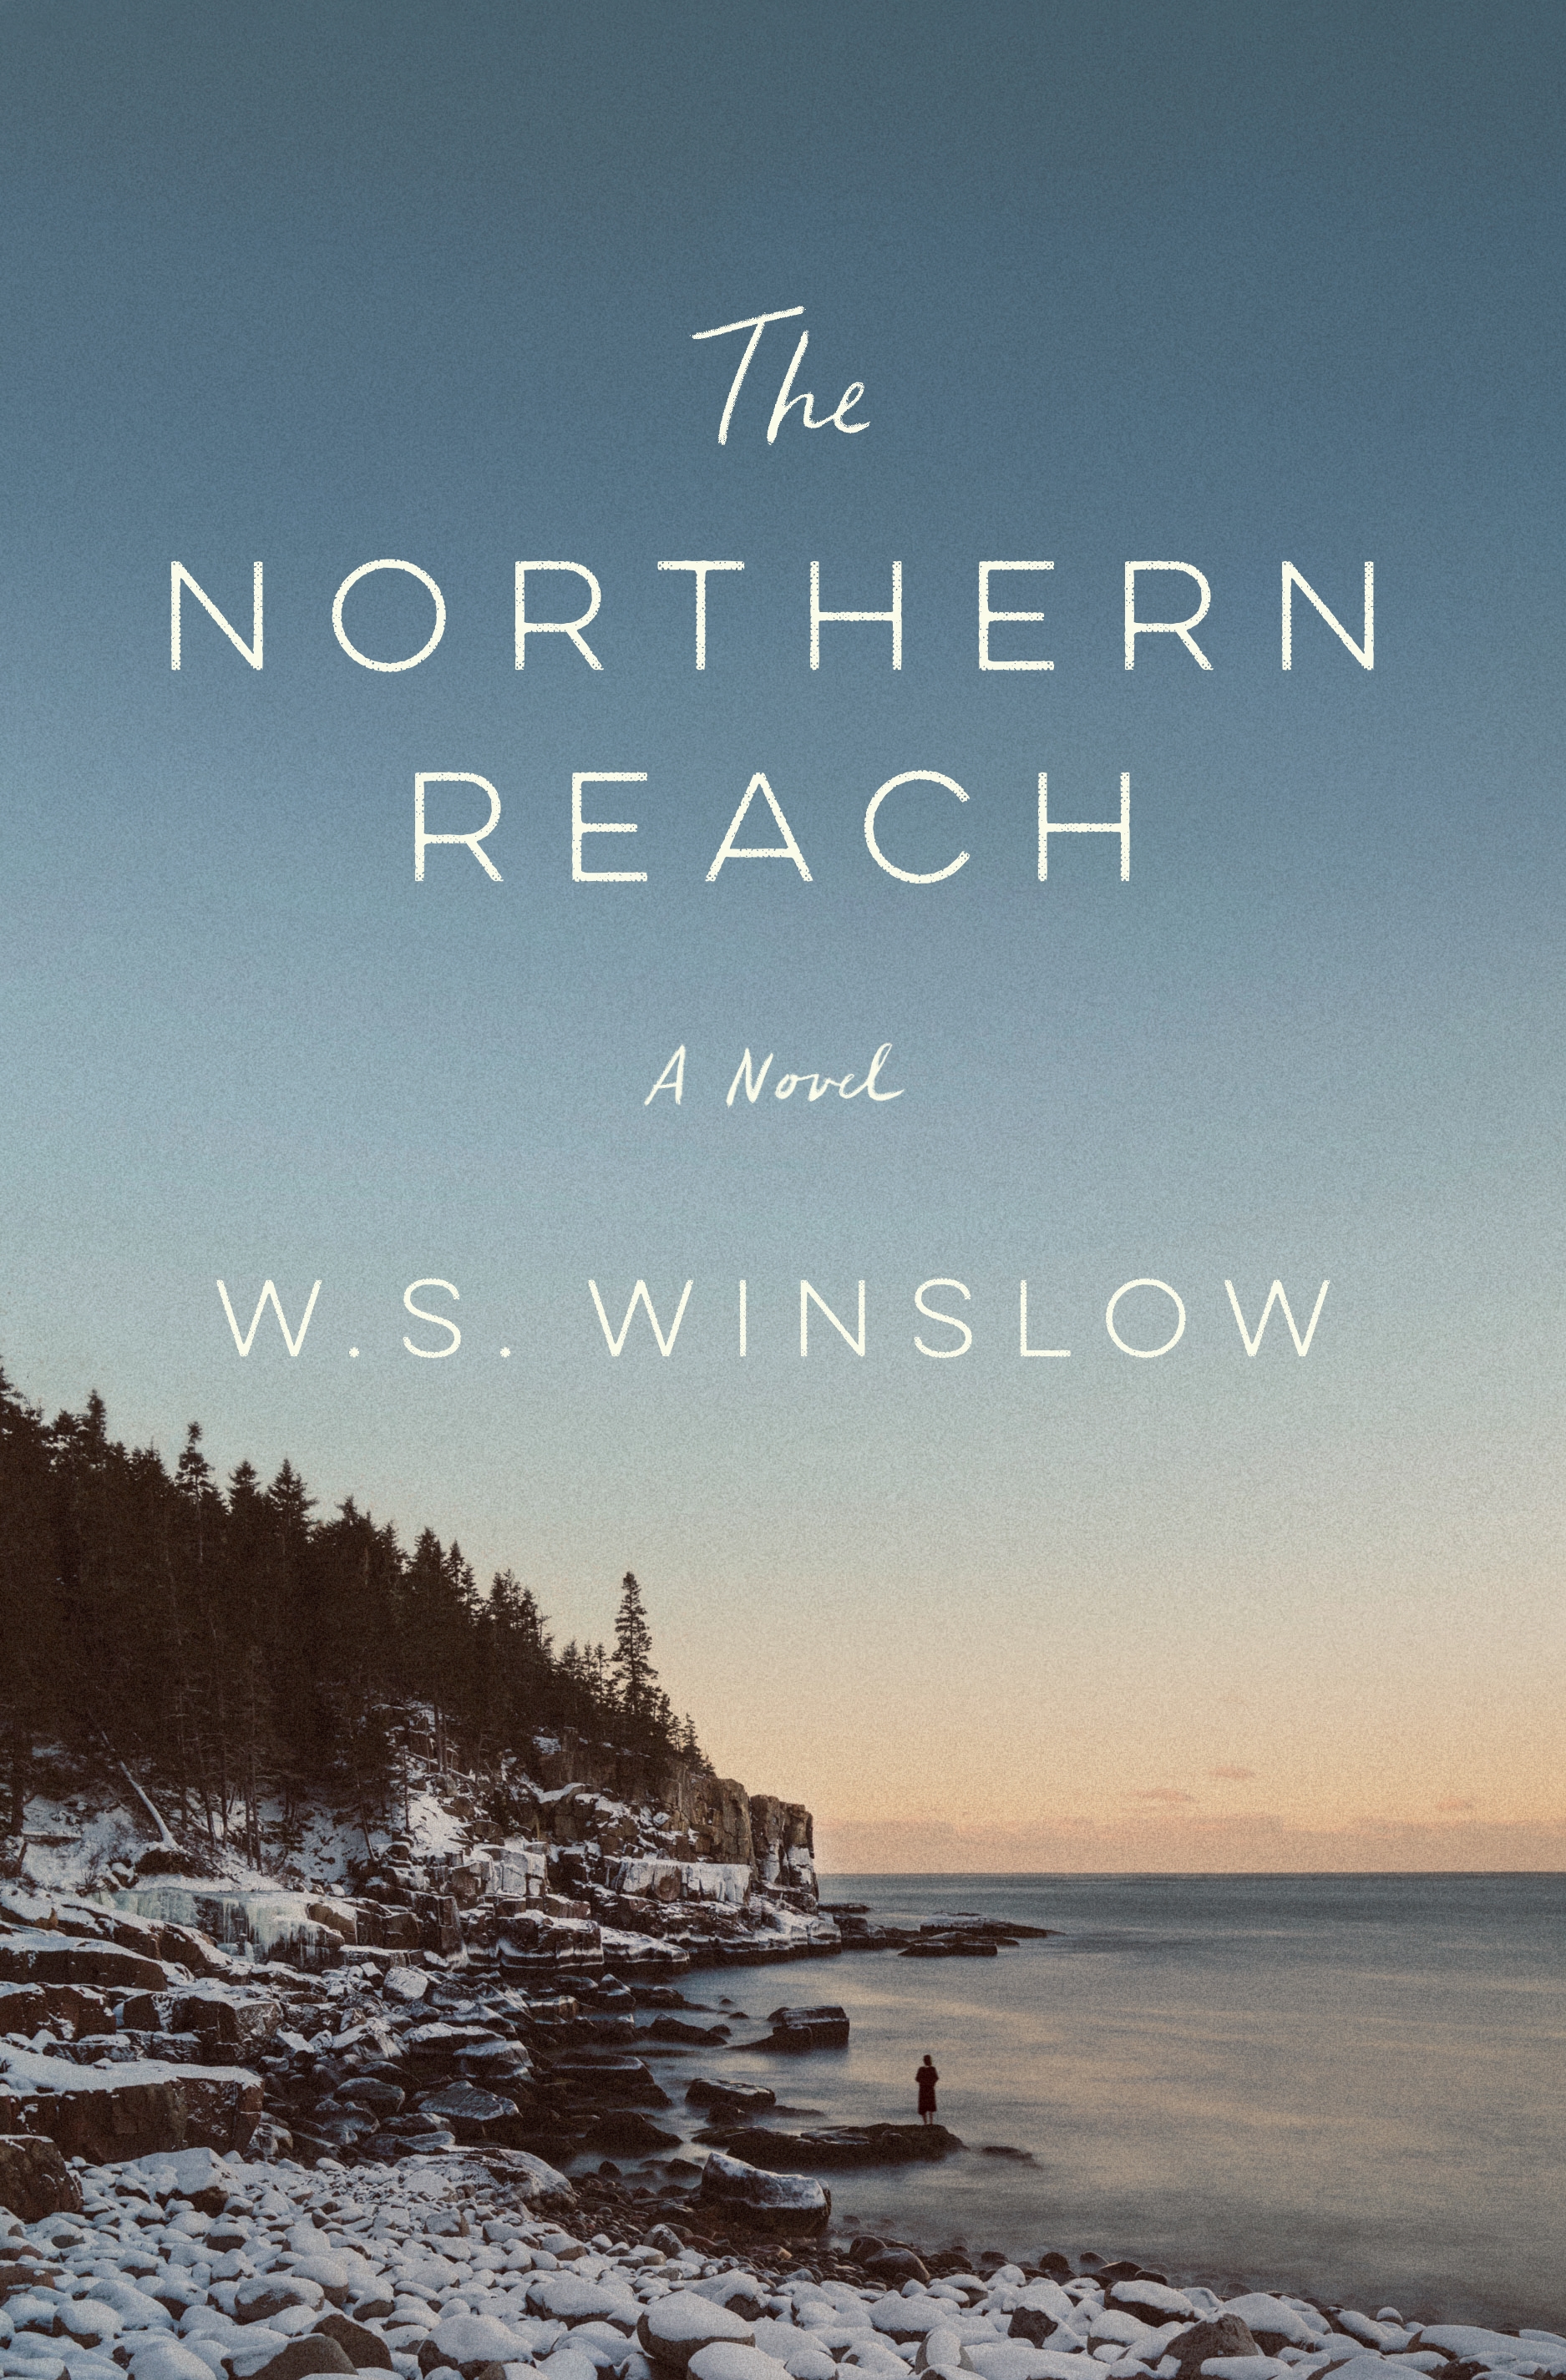 Book “The Northern Reach” by W. S. Winslow — March 2, 2021